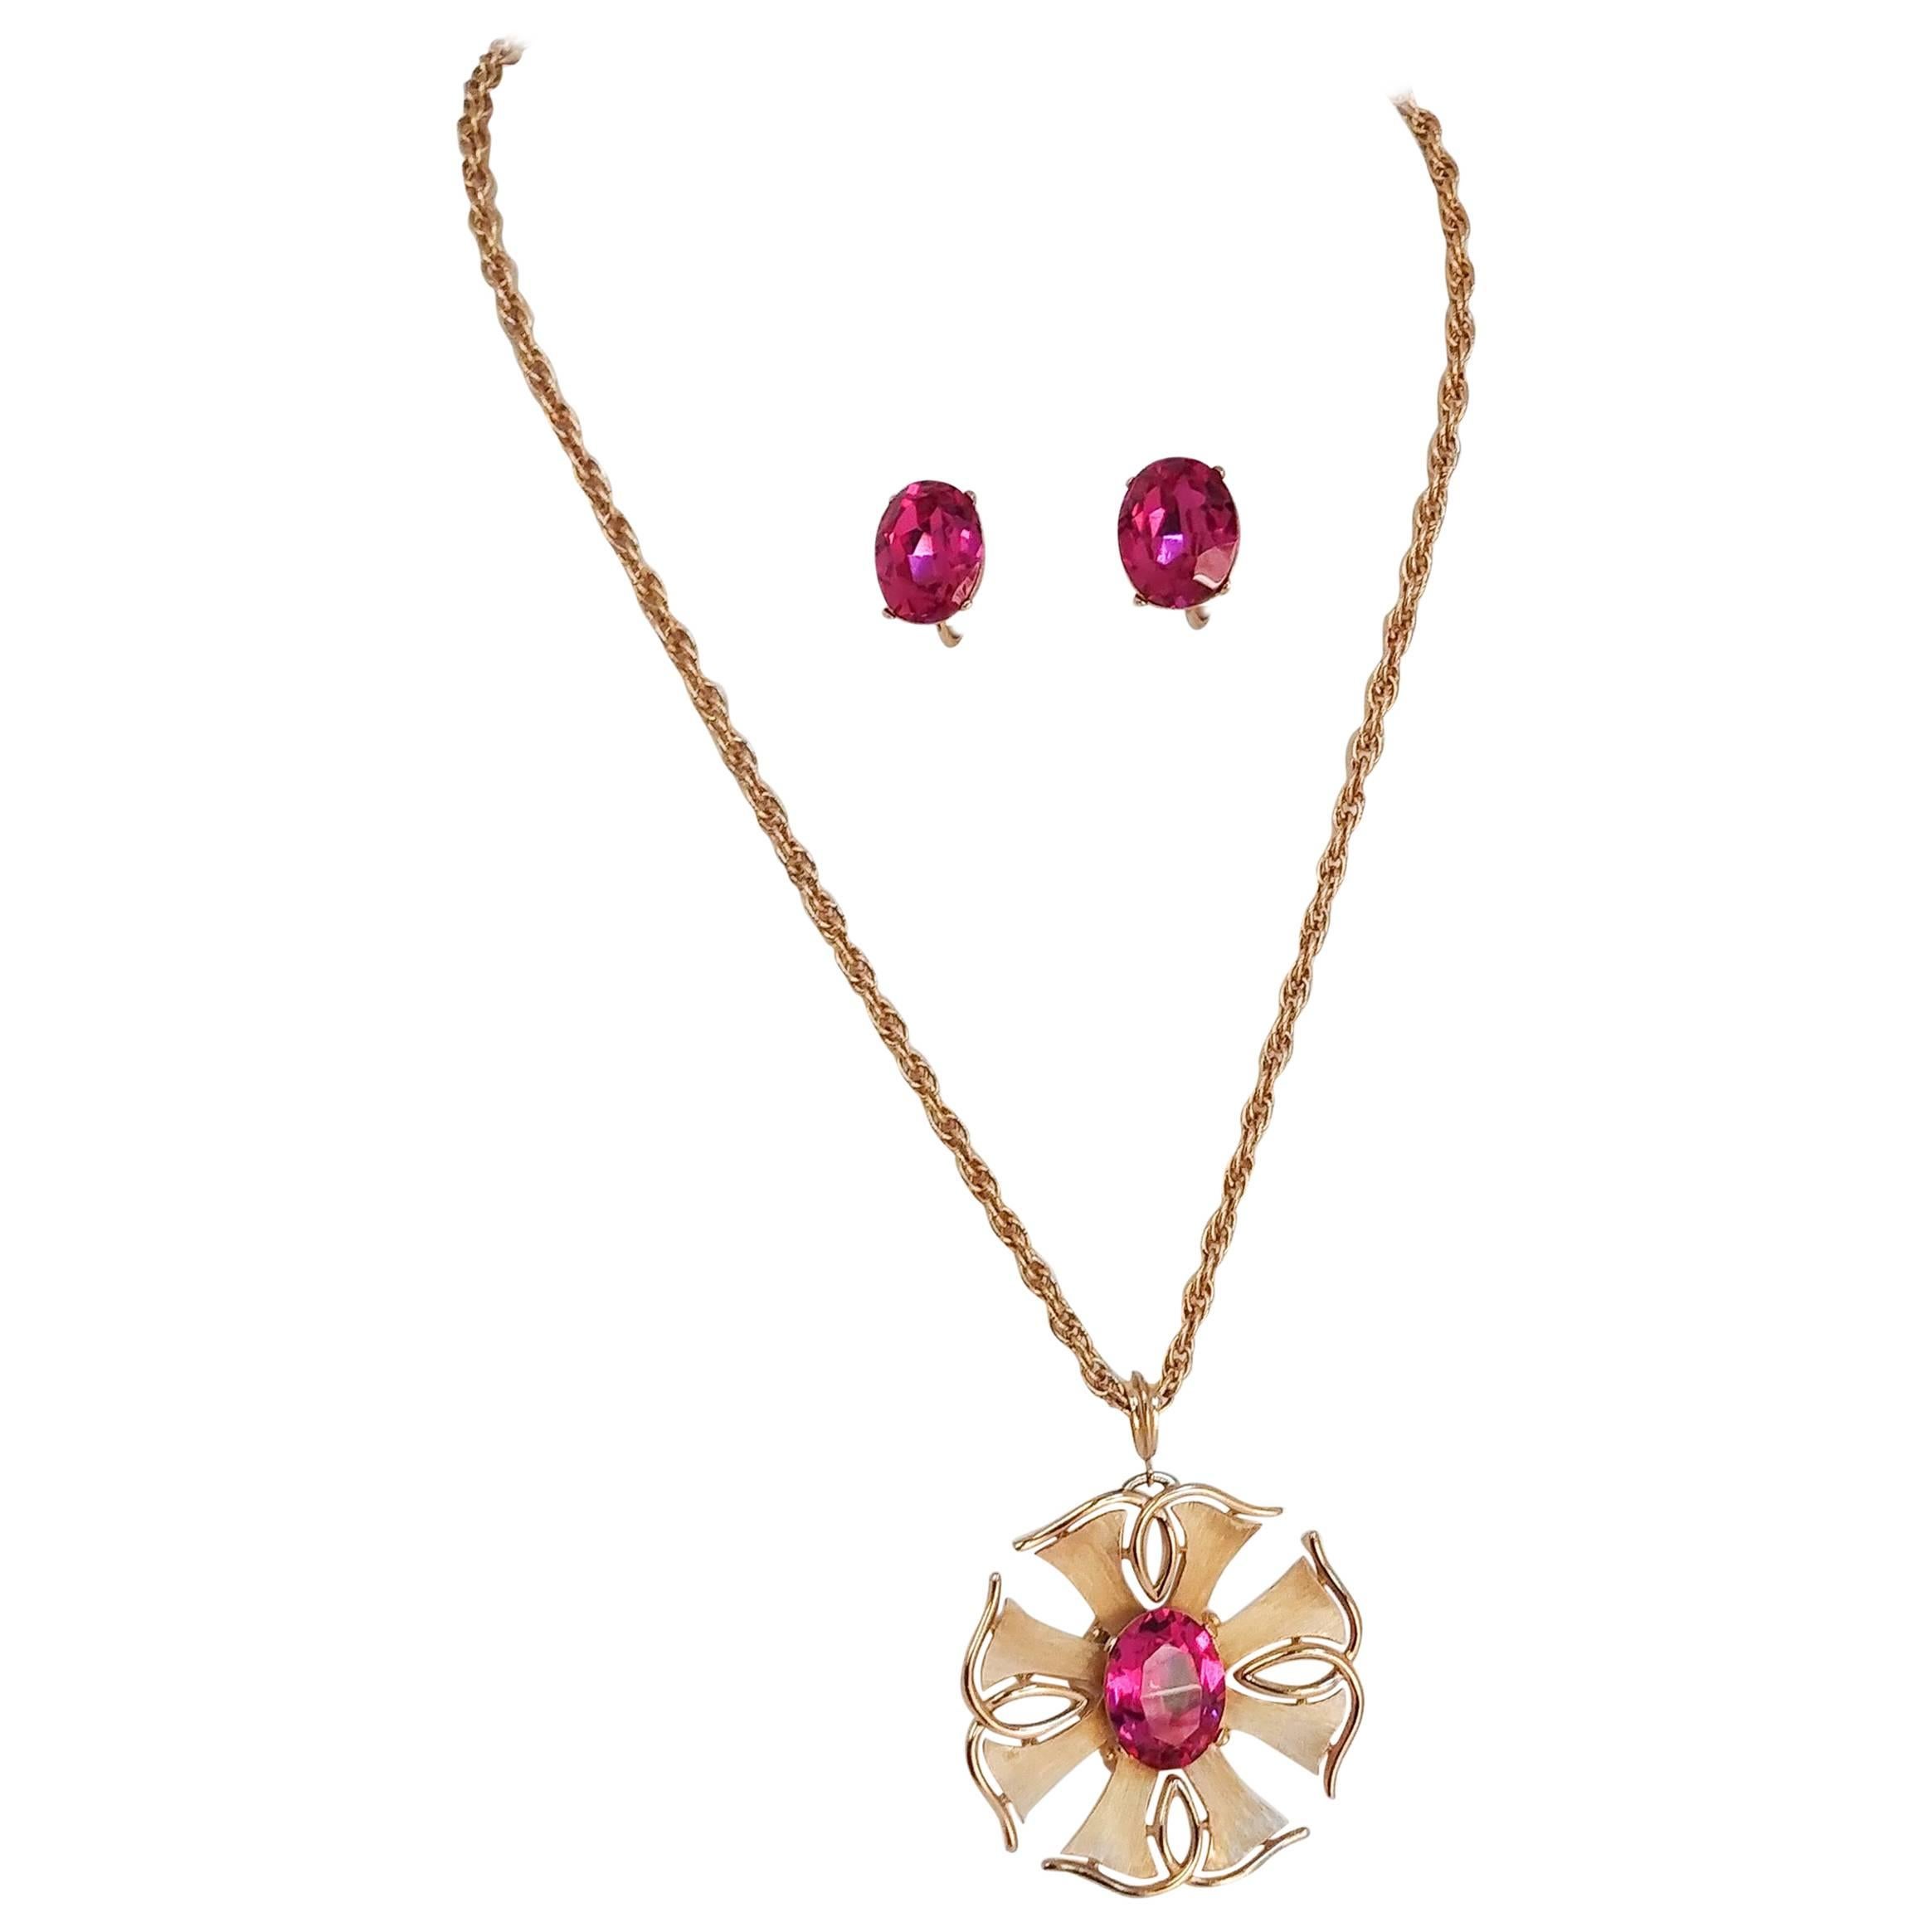 1970s Trifari Magenta and Gold Pendant and Earring Set